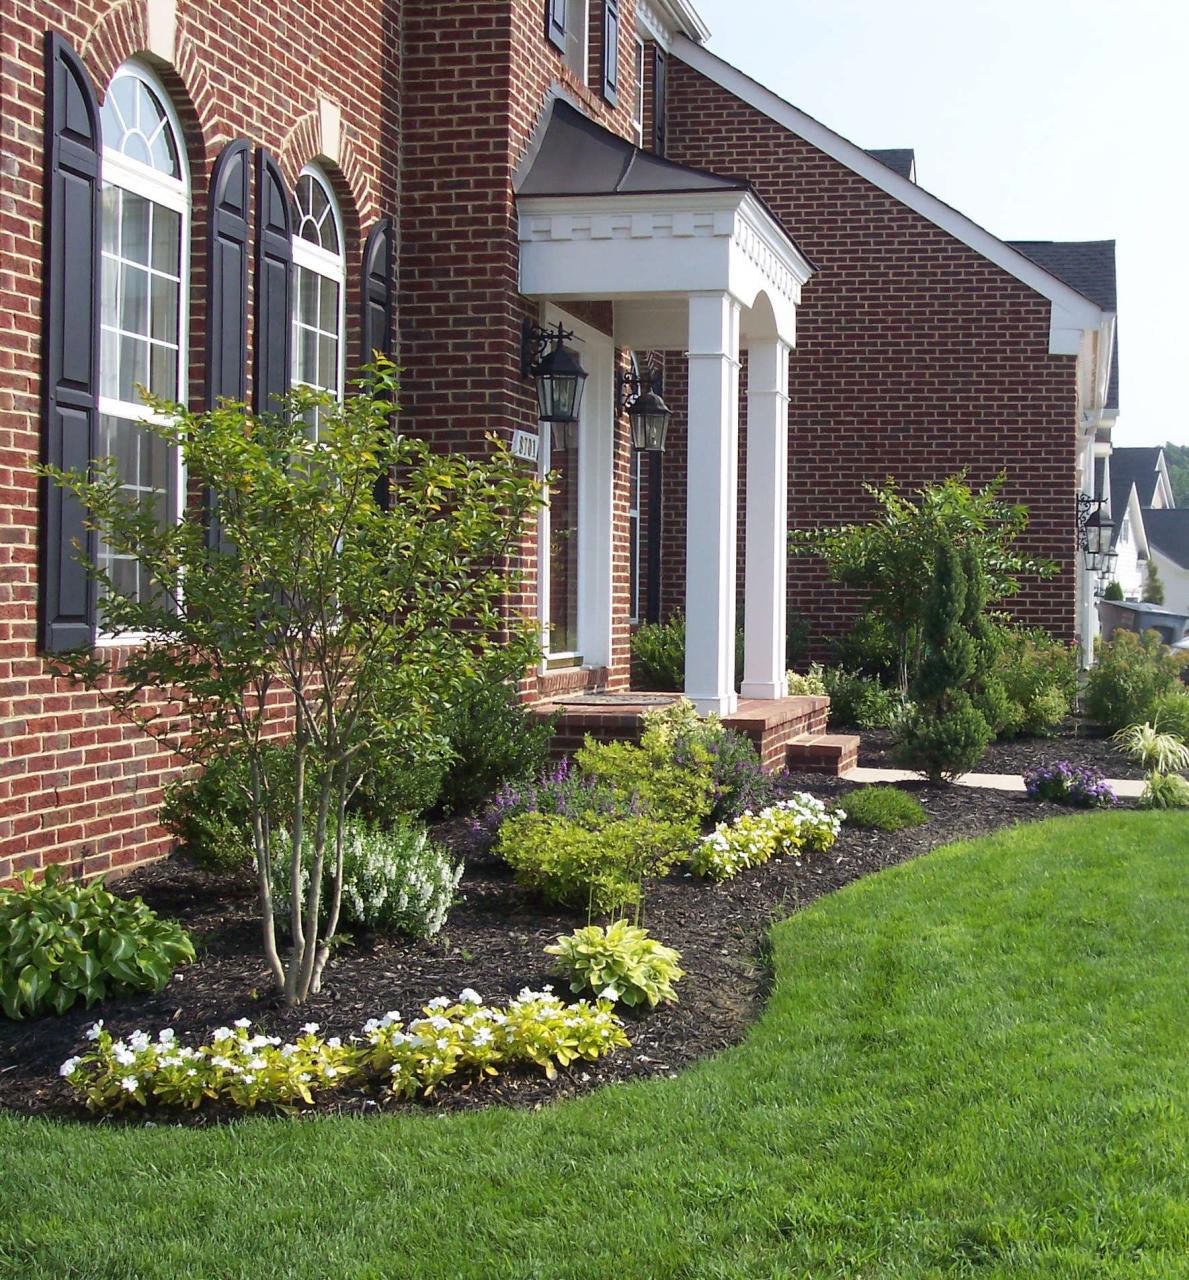 Landscaping Ideas For The Front Of My House 20 Simple But Effective